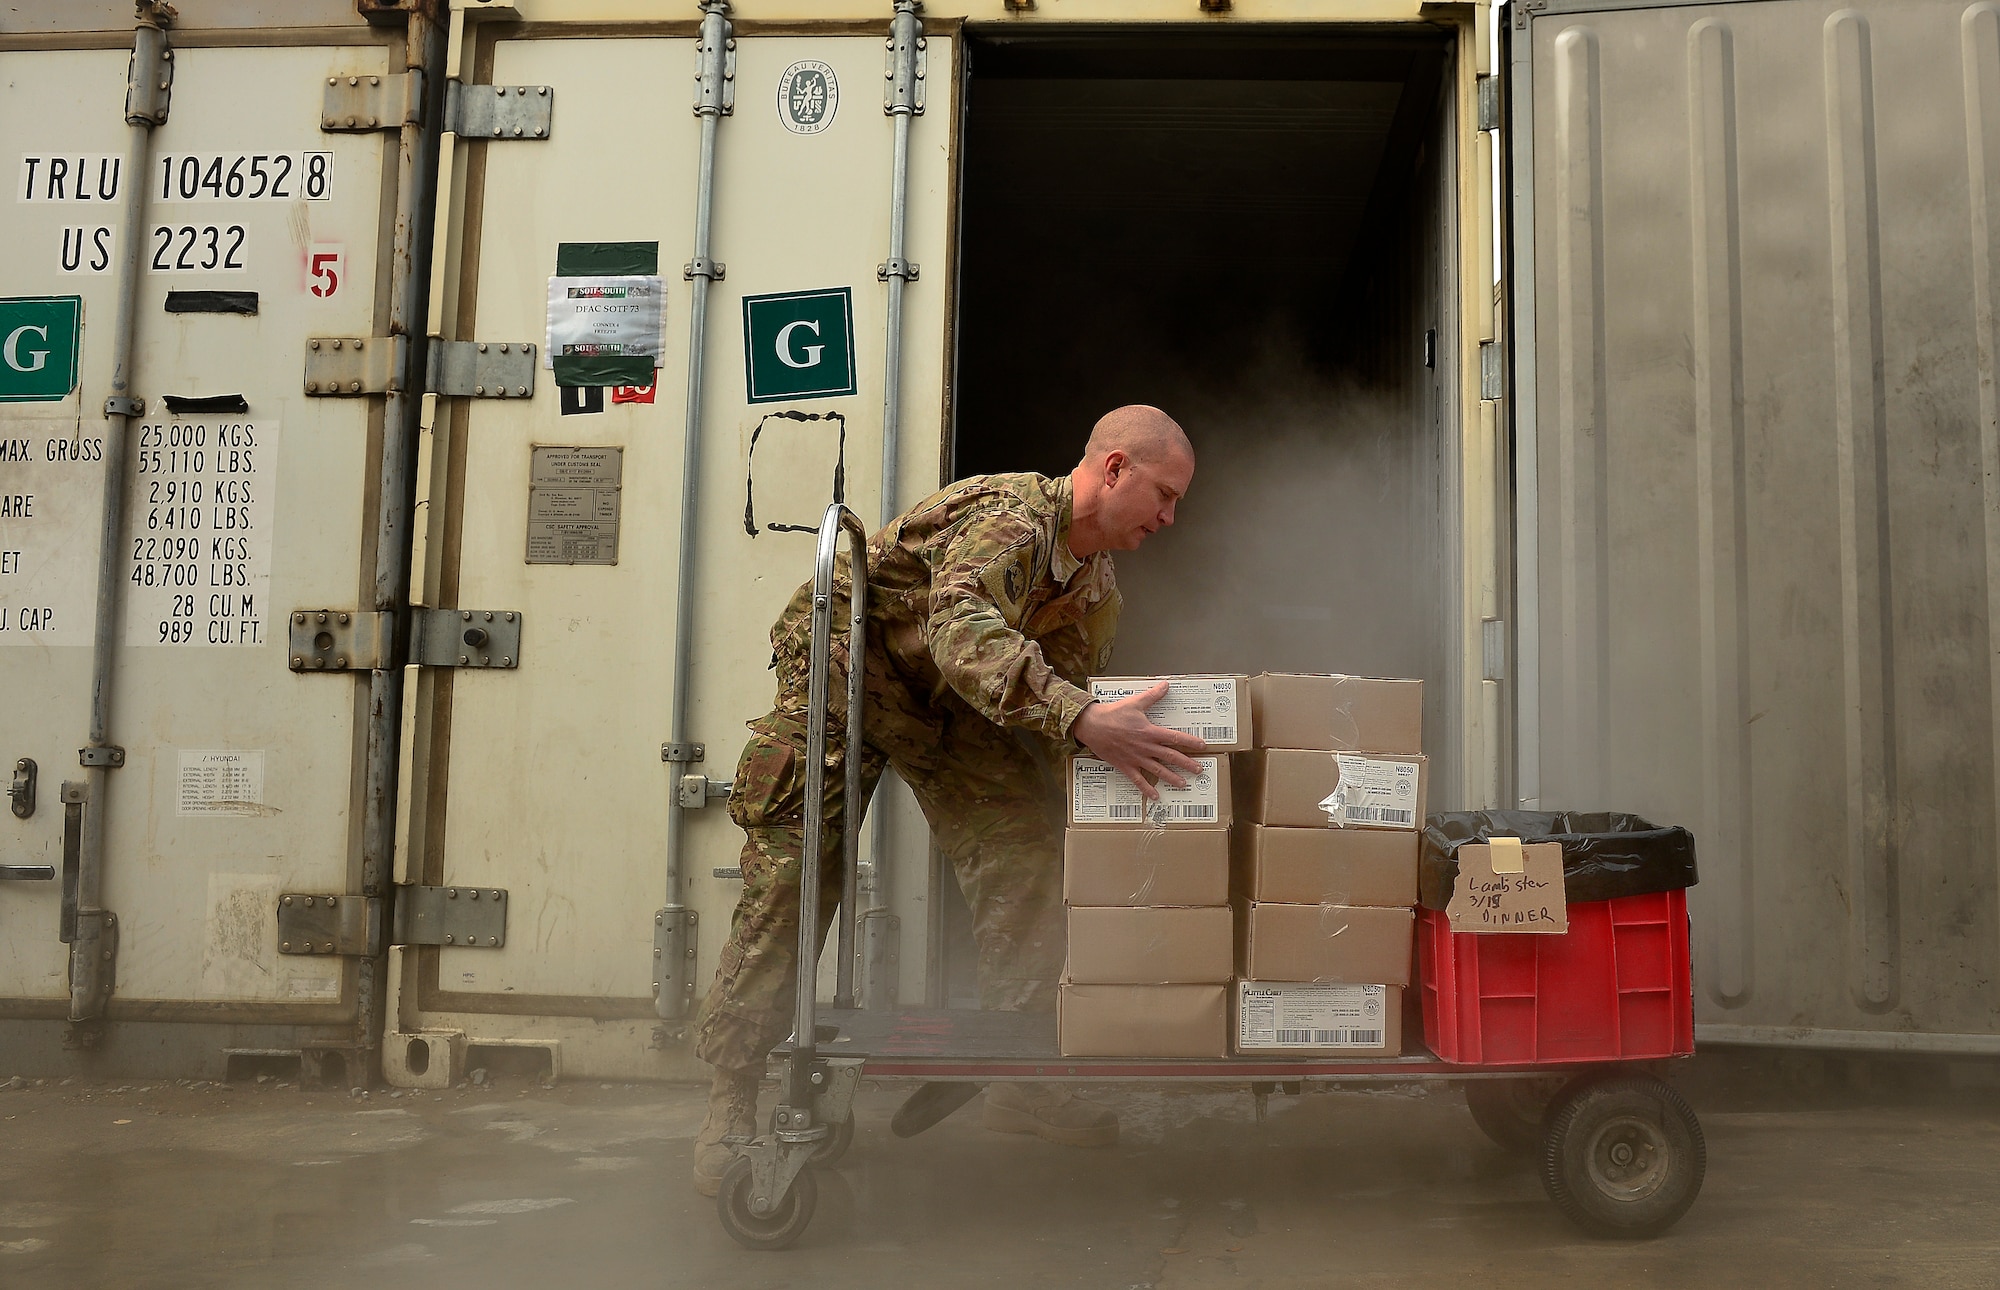 Master Sgt. Patrick Noppenberg organizes lunch food items March 15, 2014 at Kandahar Air Field, Afghanistan. Noppenberg is a 466th Air Expeditionary Squadron noncommissioned officer in charge of food services and responsible for ordering food, receiving and restocking supplies for a kitchen that provides about 1500 meals a day for personnel assigned to Kandahar Air Field. The Dallas, Texas, native is deployed from the 7th Force Support Squadron, Dyess Air Force Base, Texas. (U.S. Air Force photo/Staff Sgt. Vernon Young Jr.) 

